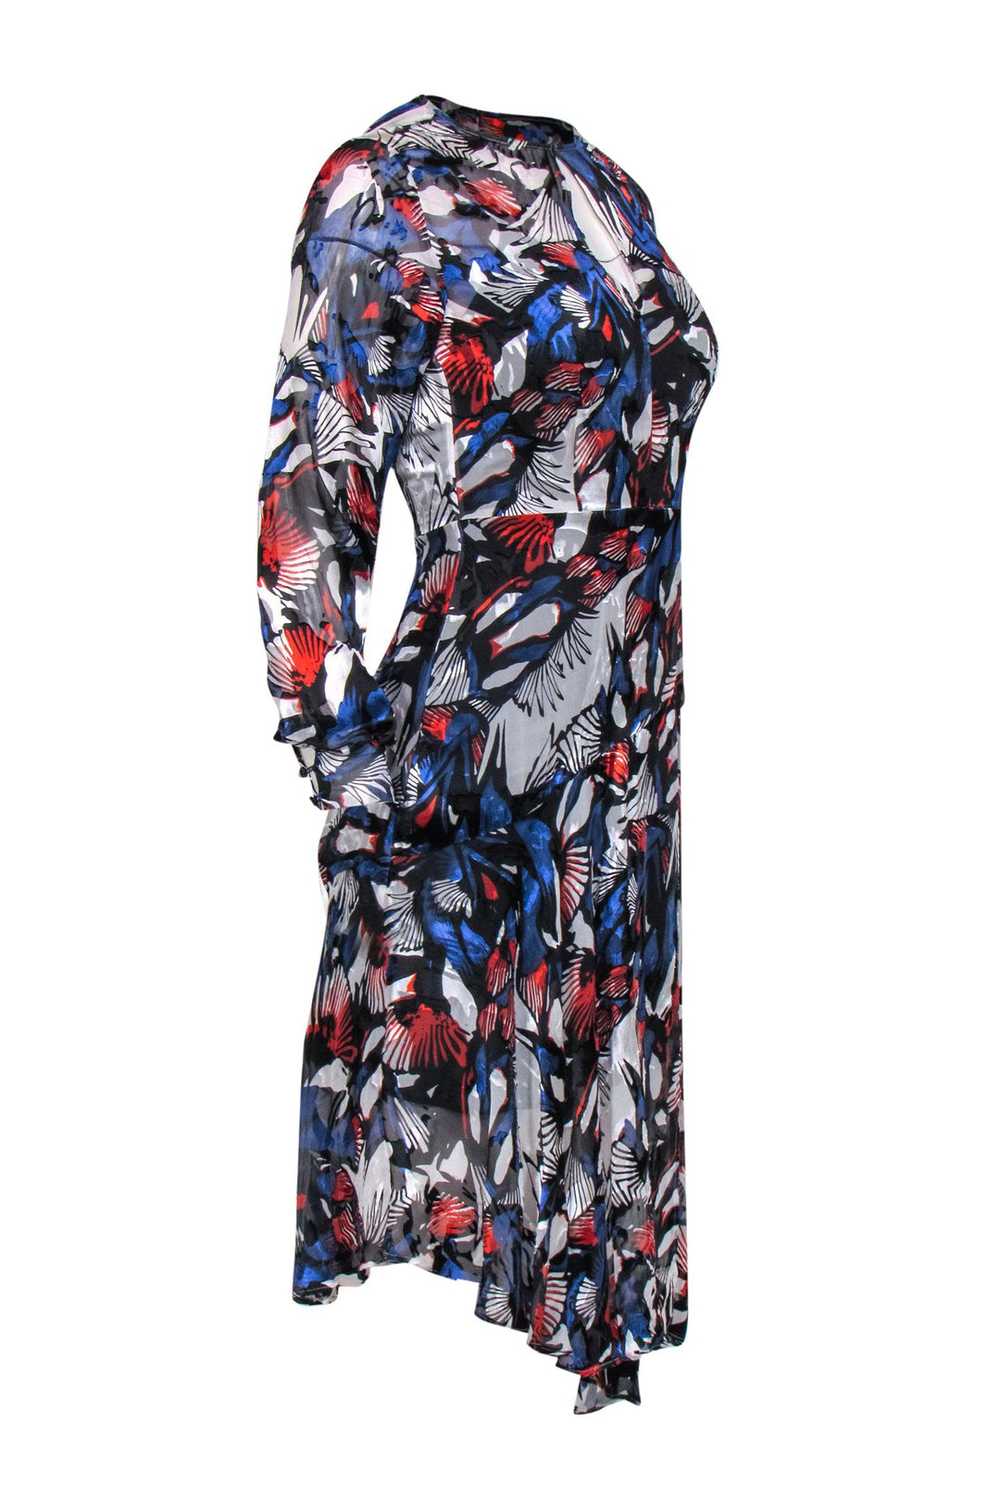 Reiss - Red, White & Blue Floral Print Sheer Long… - image 2